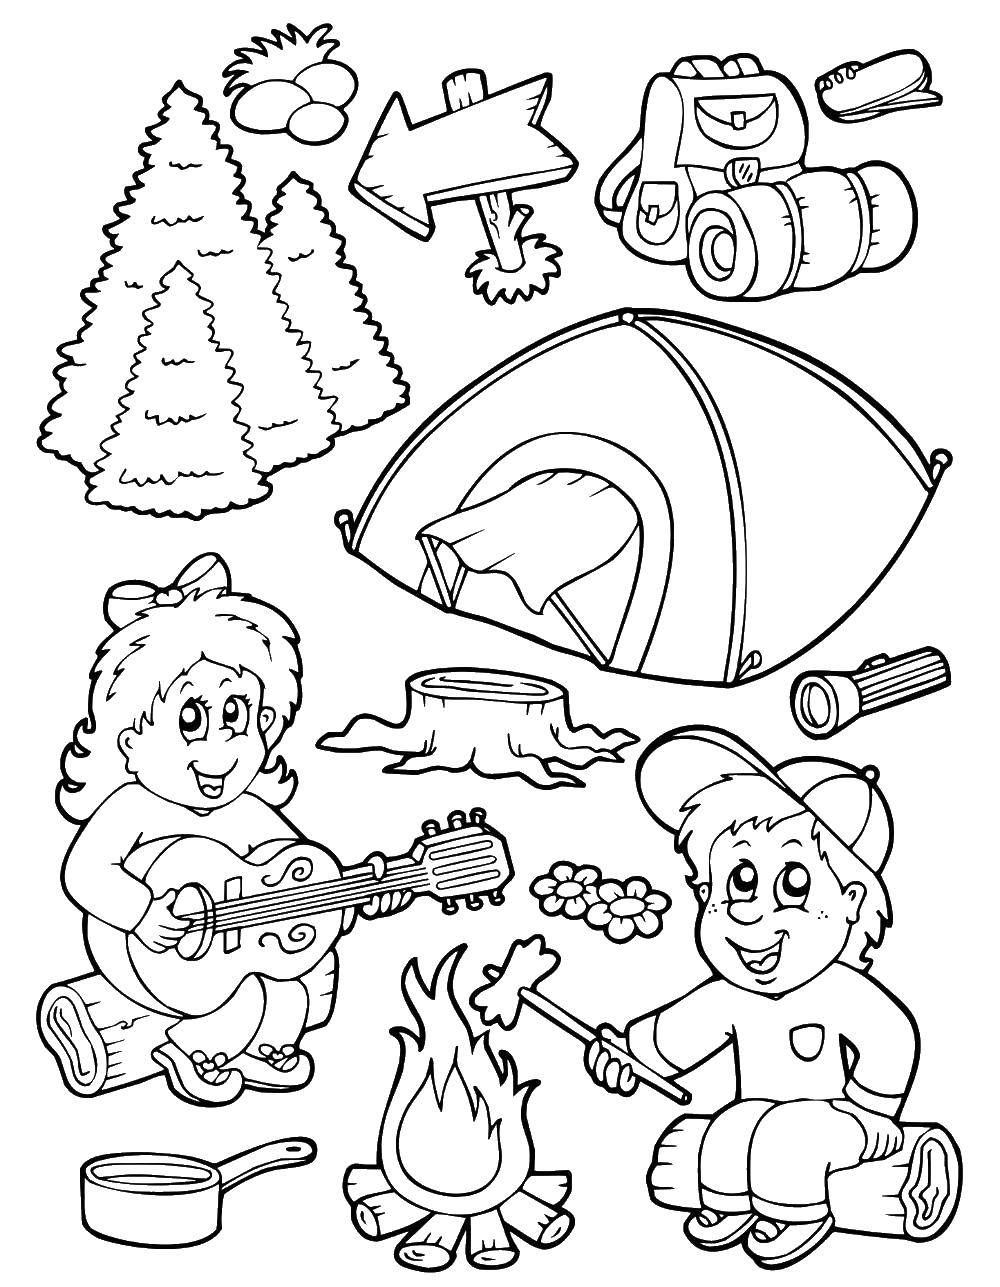 Coloring Songs in the campaign around the campfire. Category Summer fun. Tags:  Leisure, hike, campfire, forest, night.